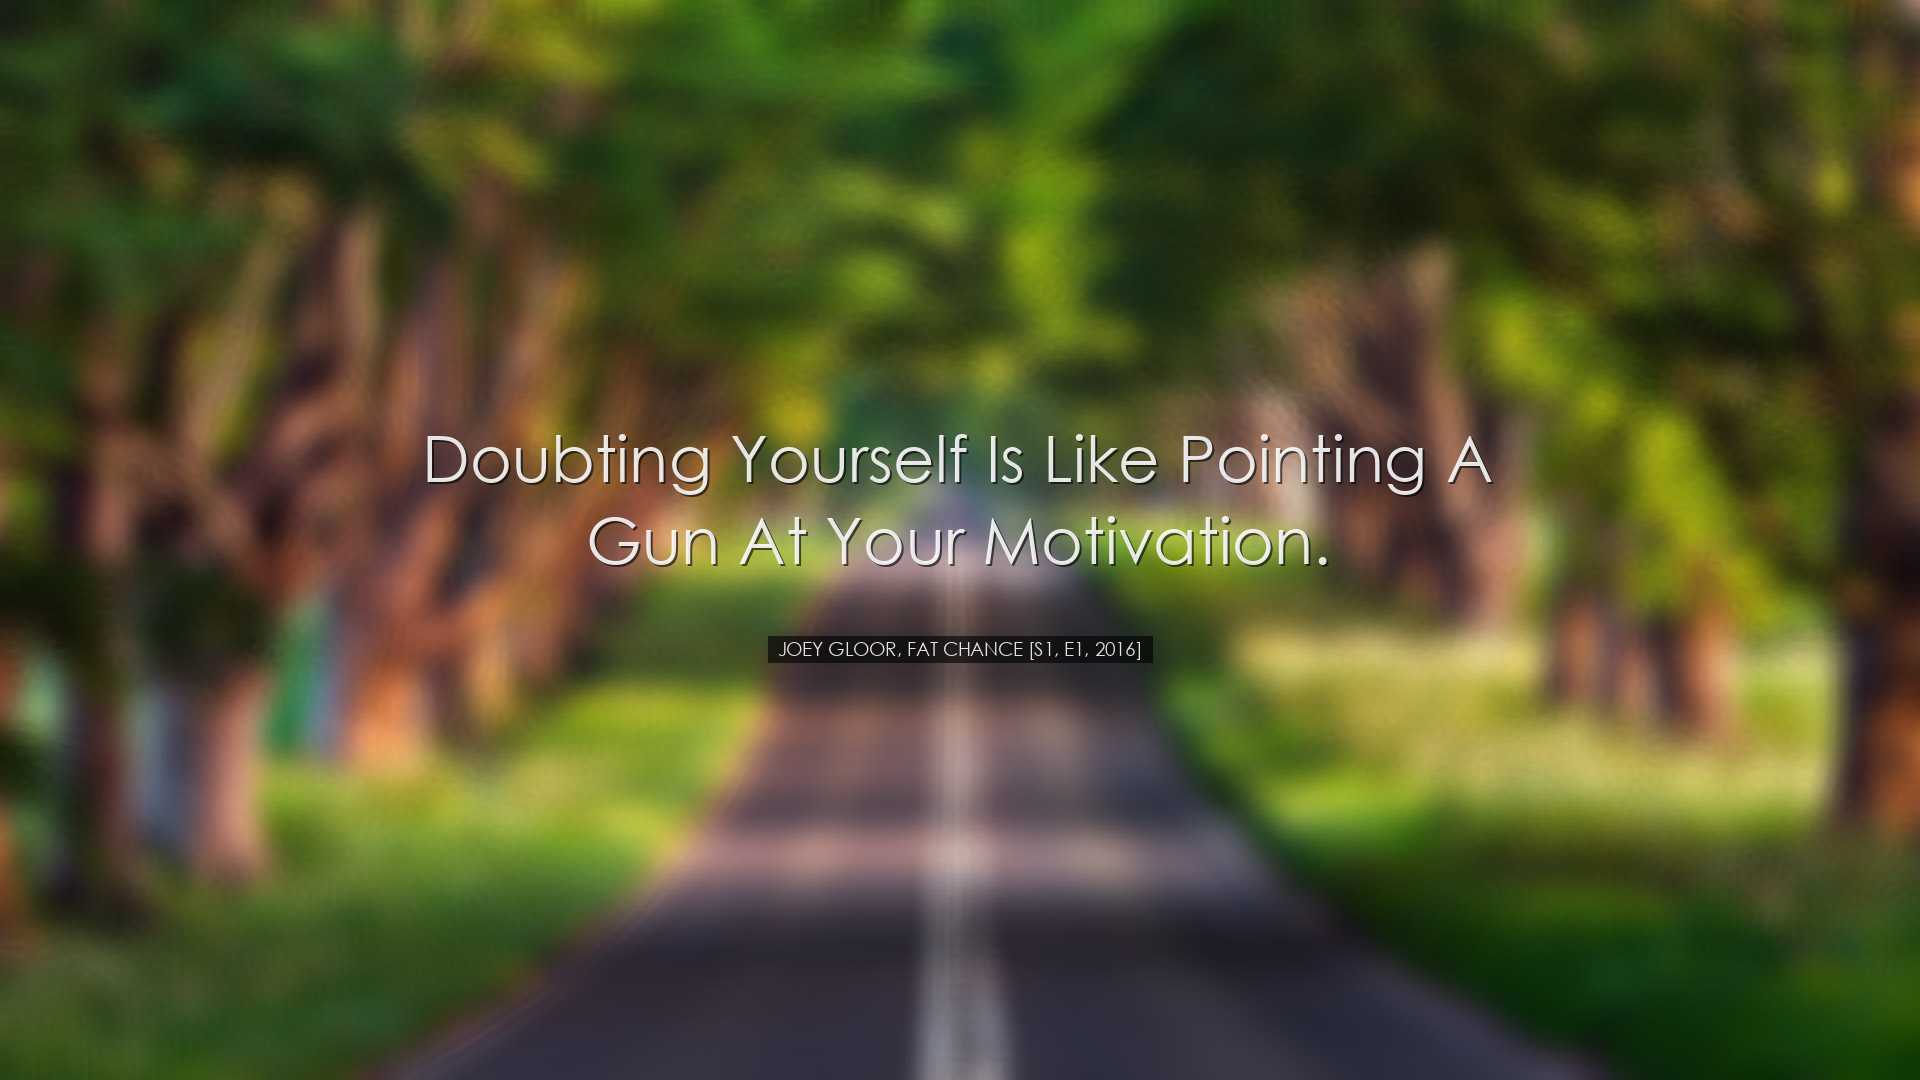 Doubting yourself is like pointing a gun at your motivation. - Joe